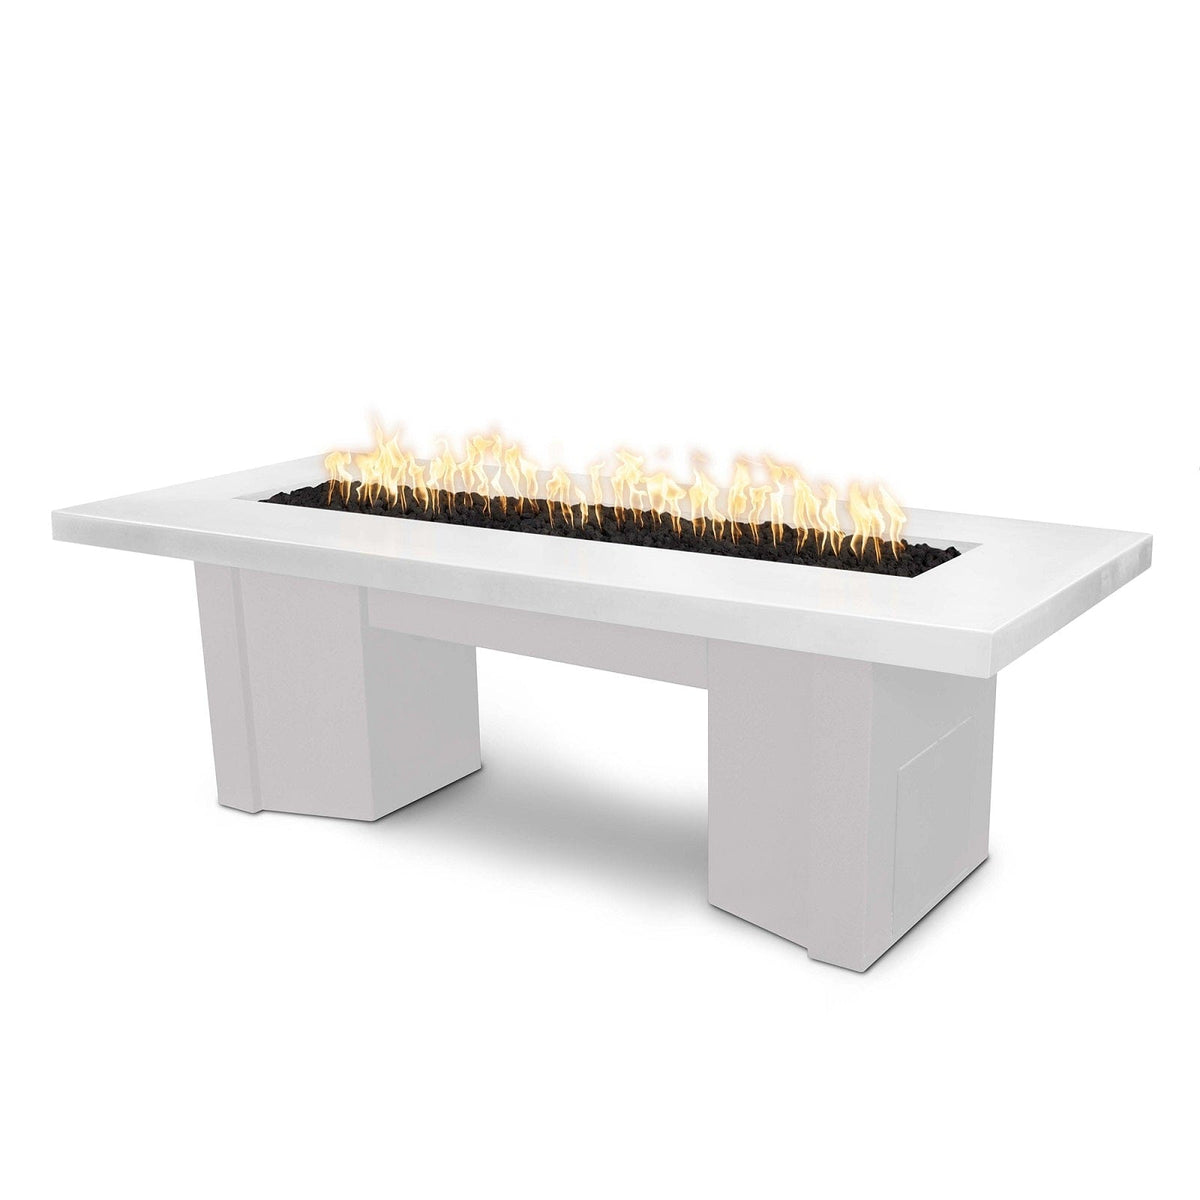 The Outdoor Plus Fire Features Limestone (-LIM) / White Powder Coated Steel (-WHT) The Outdoor Plus 78&quot; Alameda Fire Table Smooth Concrete in Liquid Propane - Flame Sense System with Push Button Spark Igniter / OPT-ALMGFRC78FSEN-LP